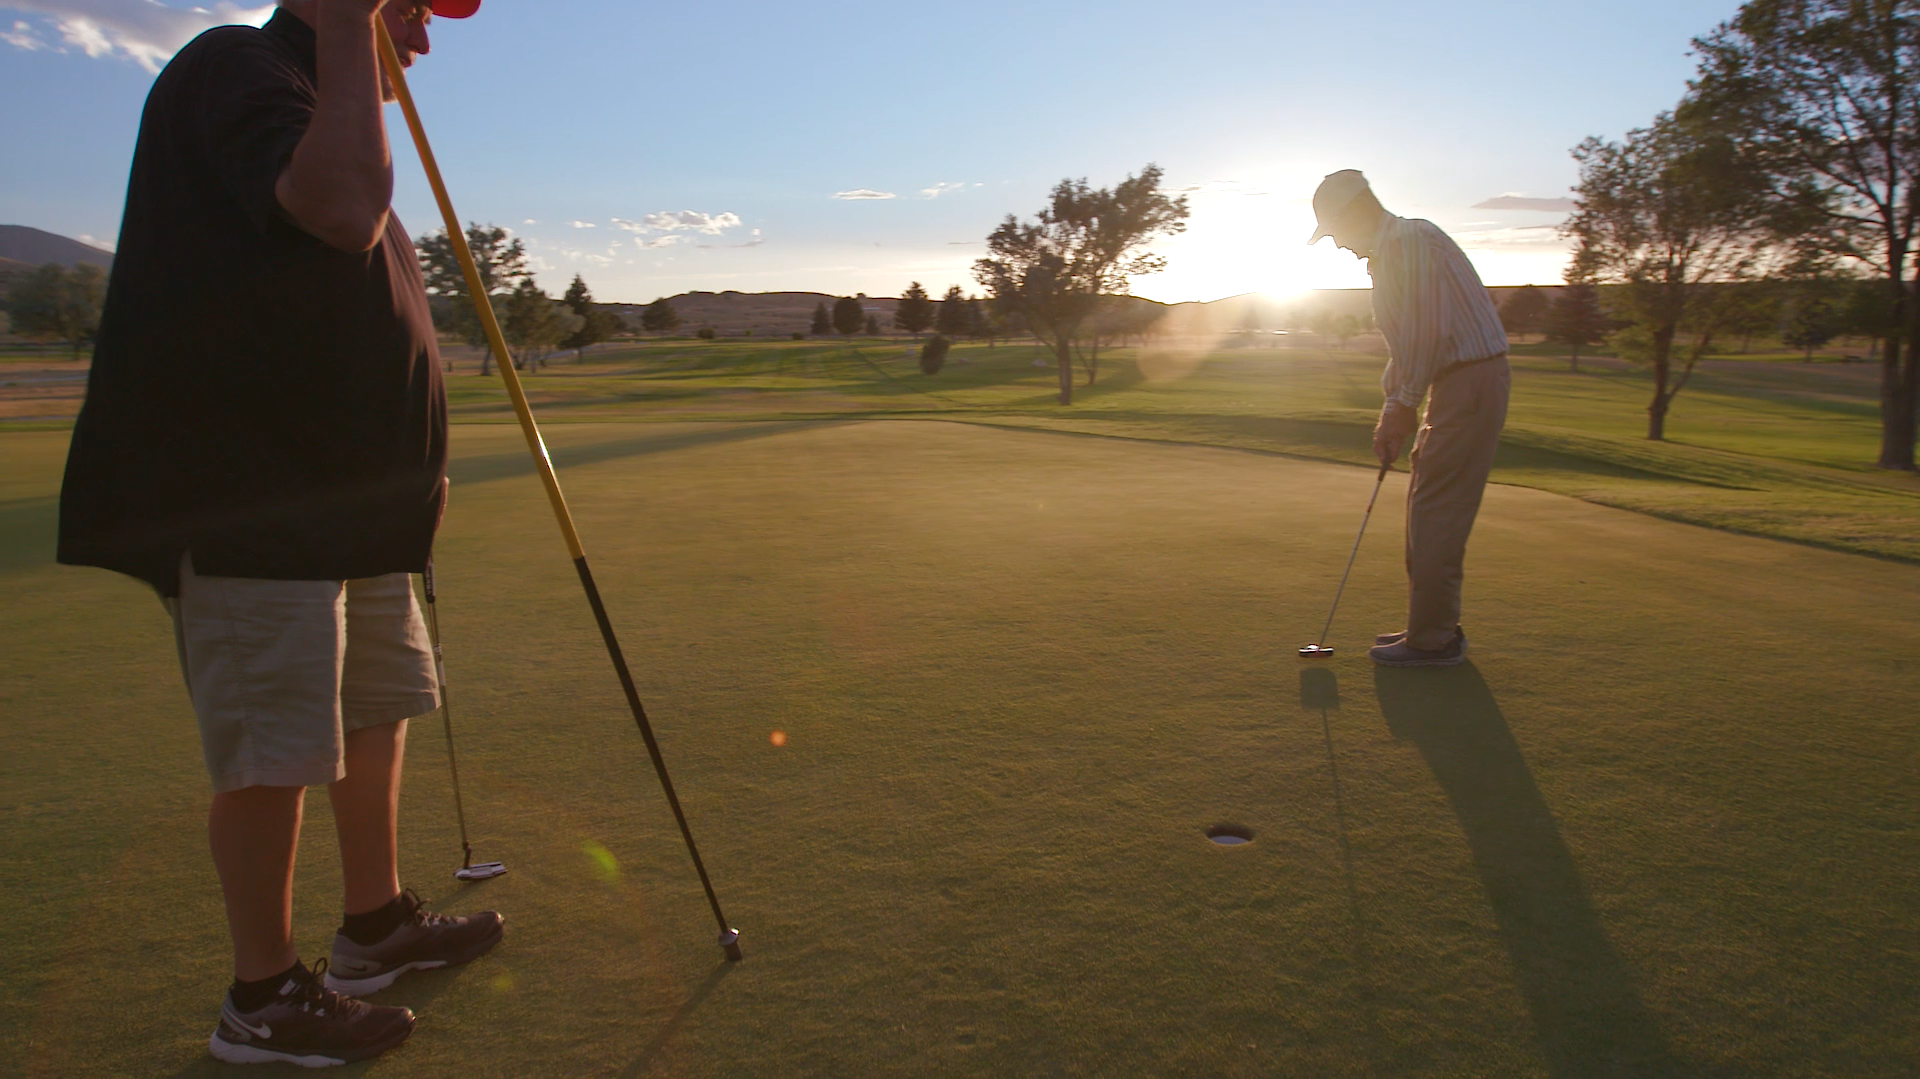 Enjoy a round of golf at Chimney Rock Golf Course.